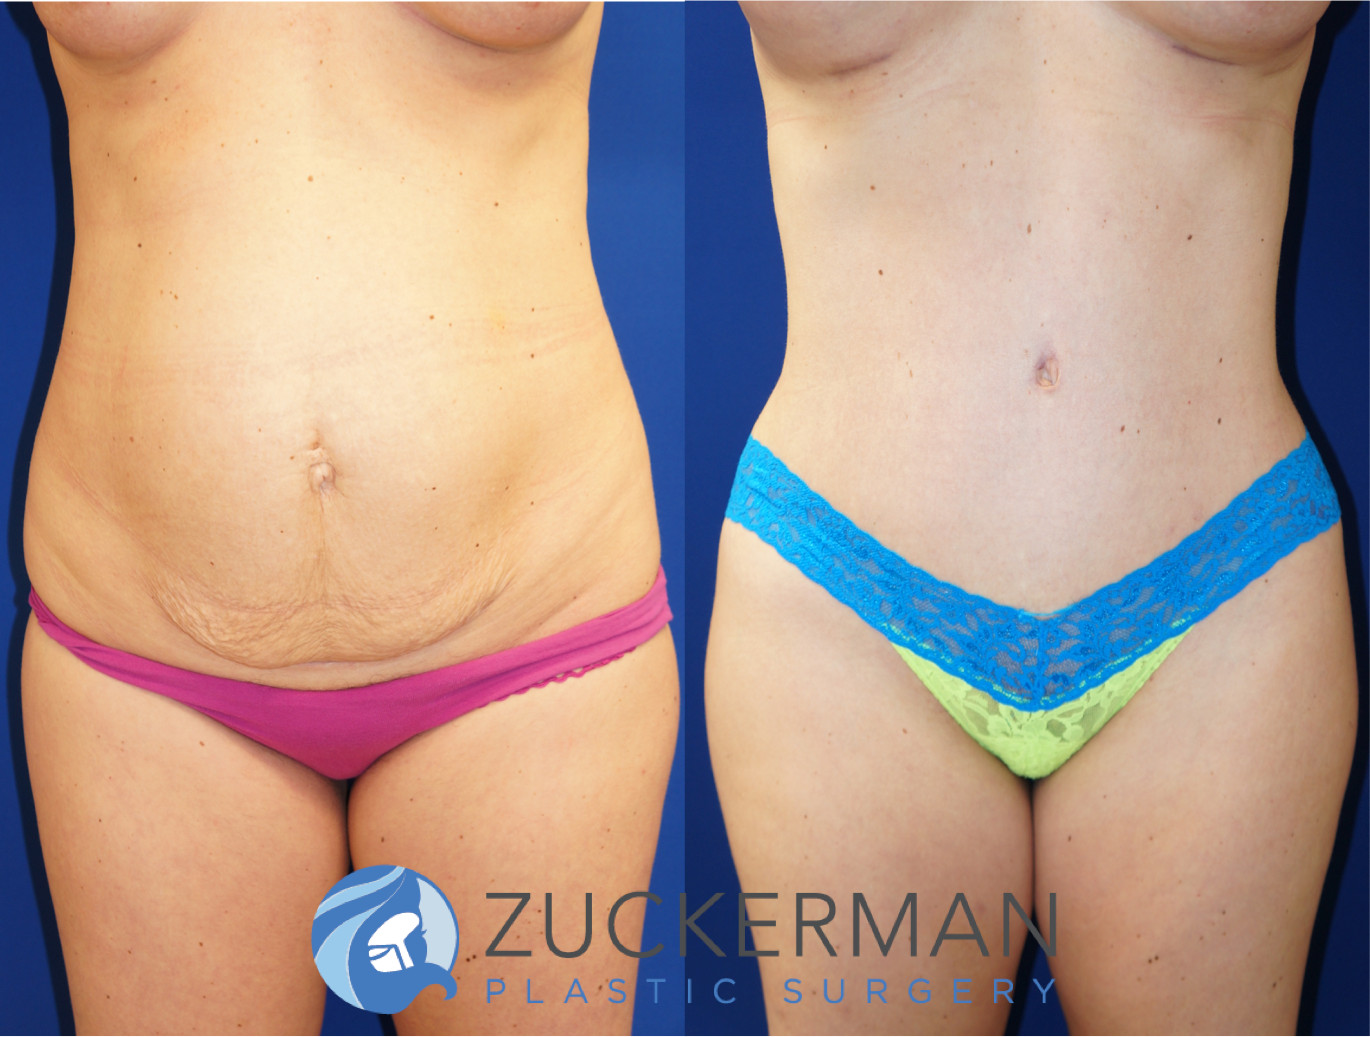 Tummy Tuck NYC Plastic Surgery Complete Guide - Manhattan